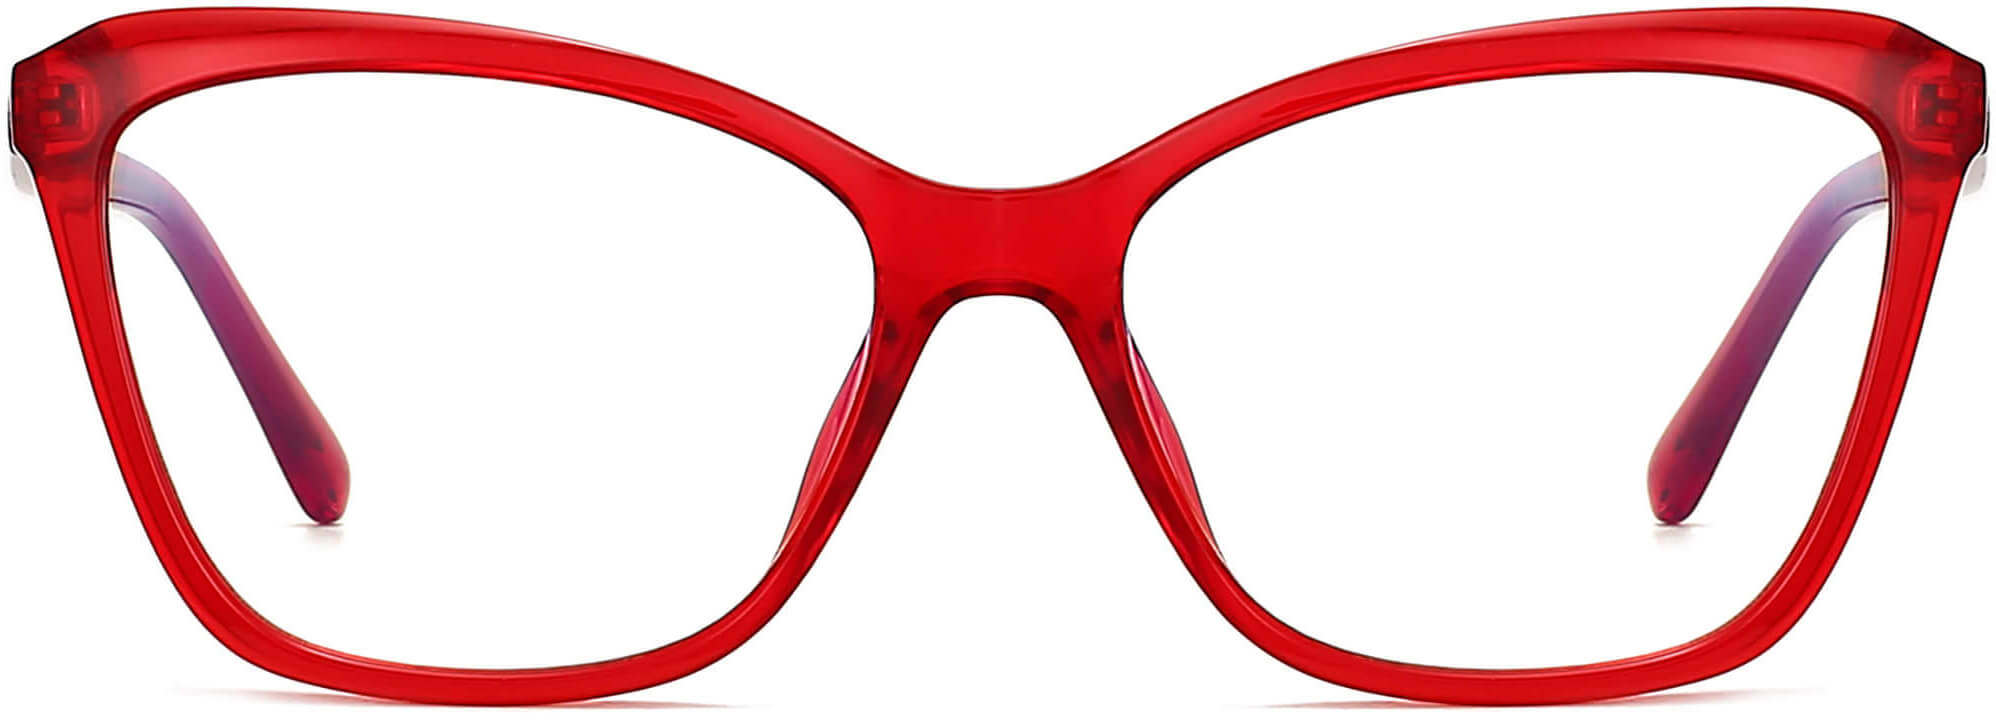 Cherry Cateye Red Eyeglasses from ANRRI, front view